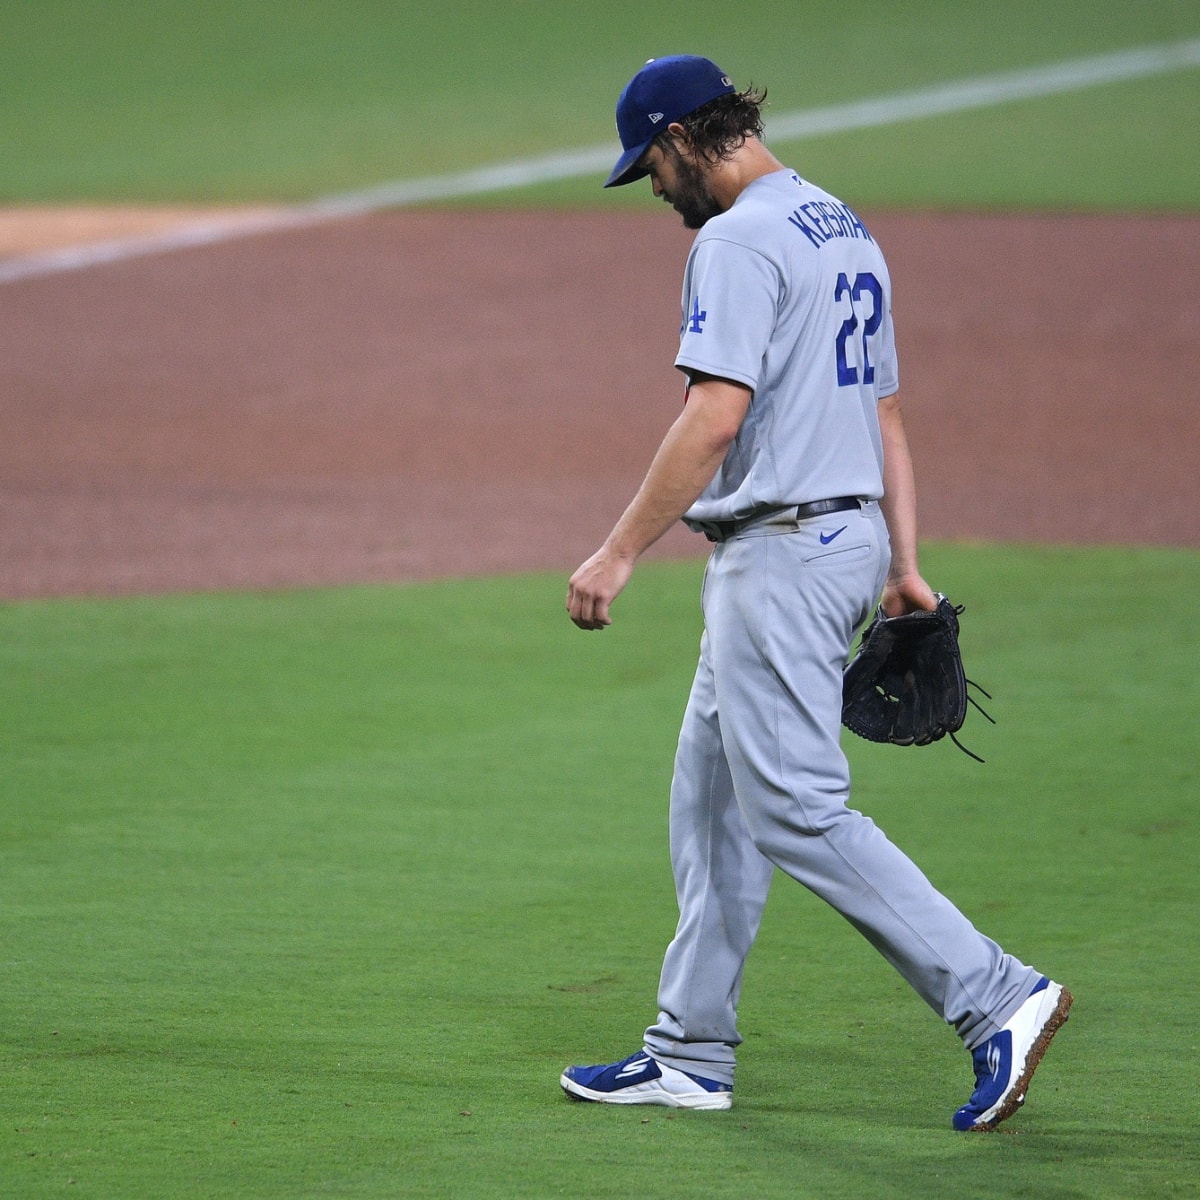 Dodgers: Clayton Kershaw Or Sandy Koufax As the Greatest of All